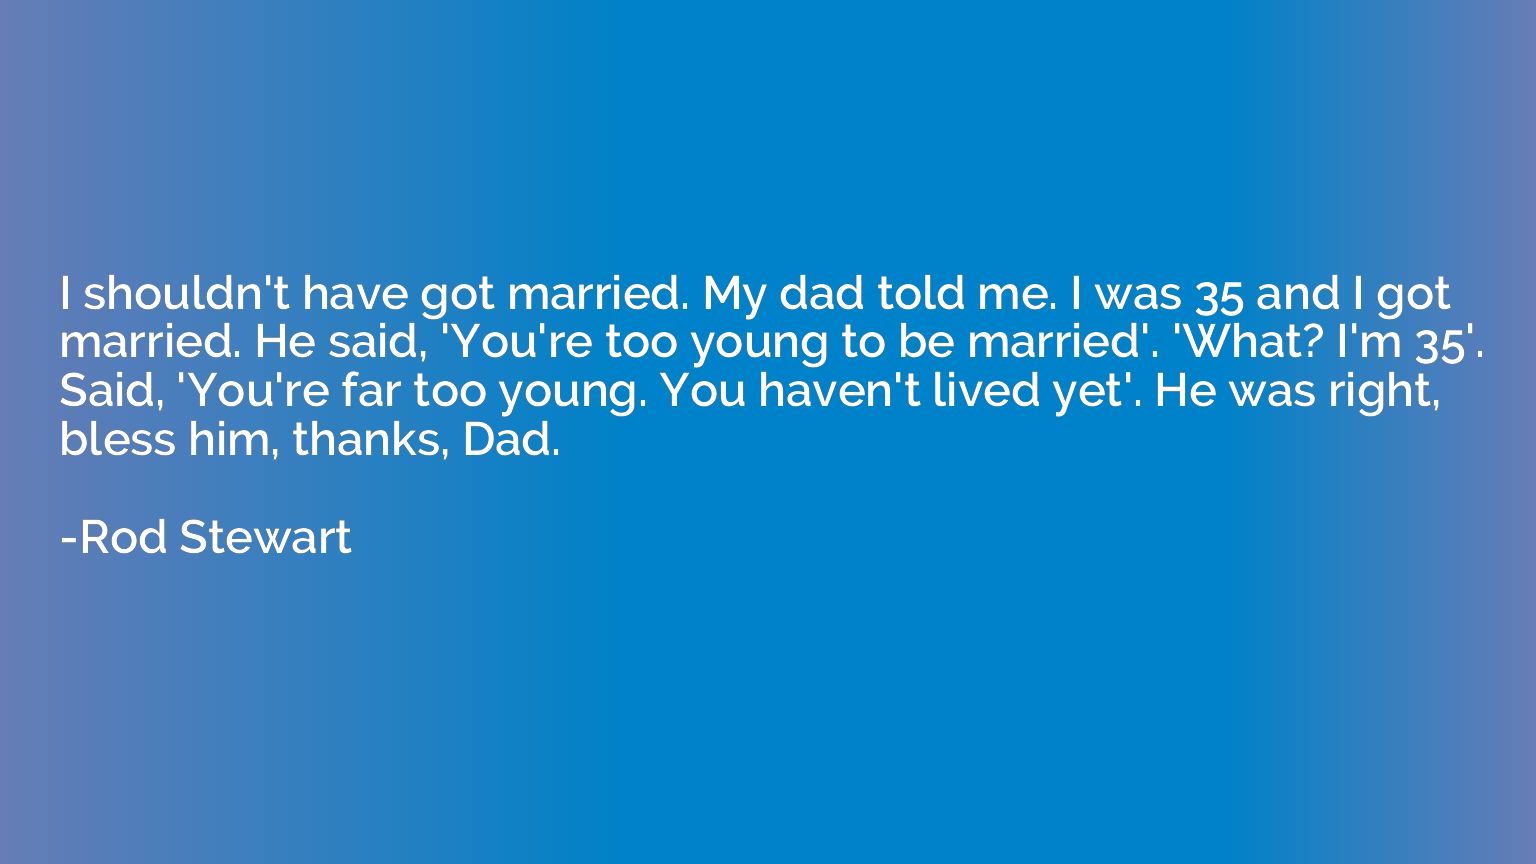 I shouldn't have got married. My dad told me. I was 35 and I